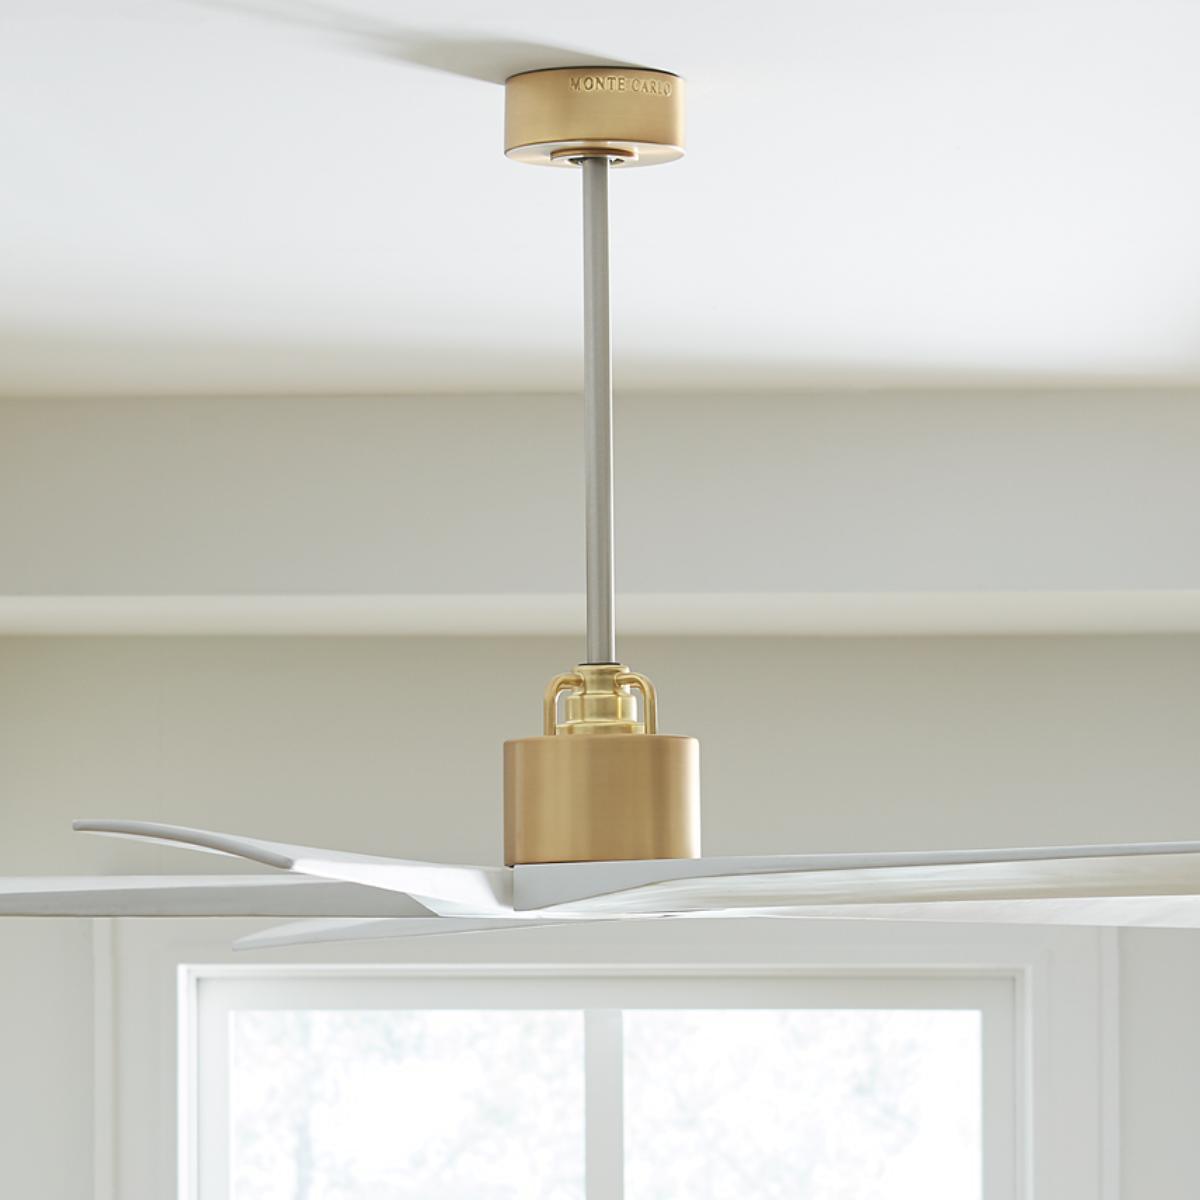 Aspen 70 Inch Ceiling Fan with Remote, Burnished Brass with Matte White Blades - Bees Lighting